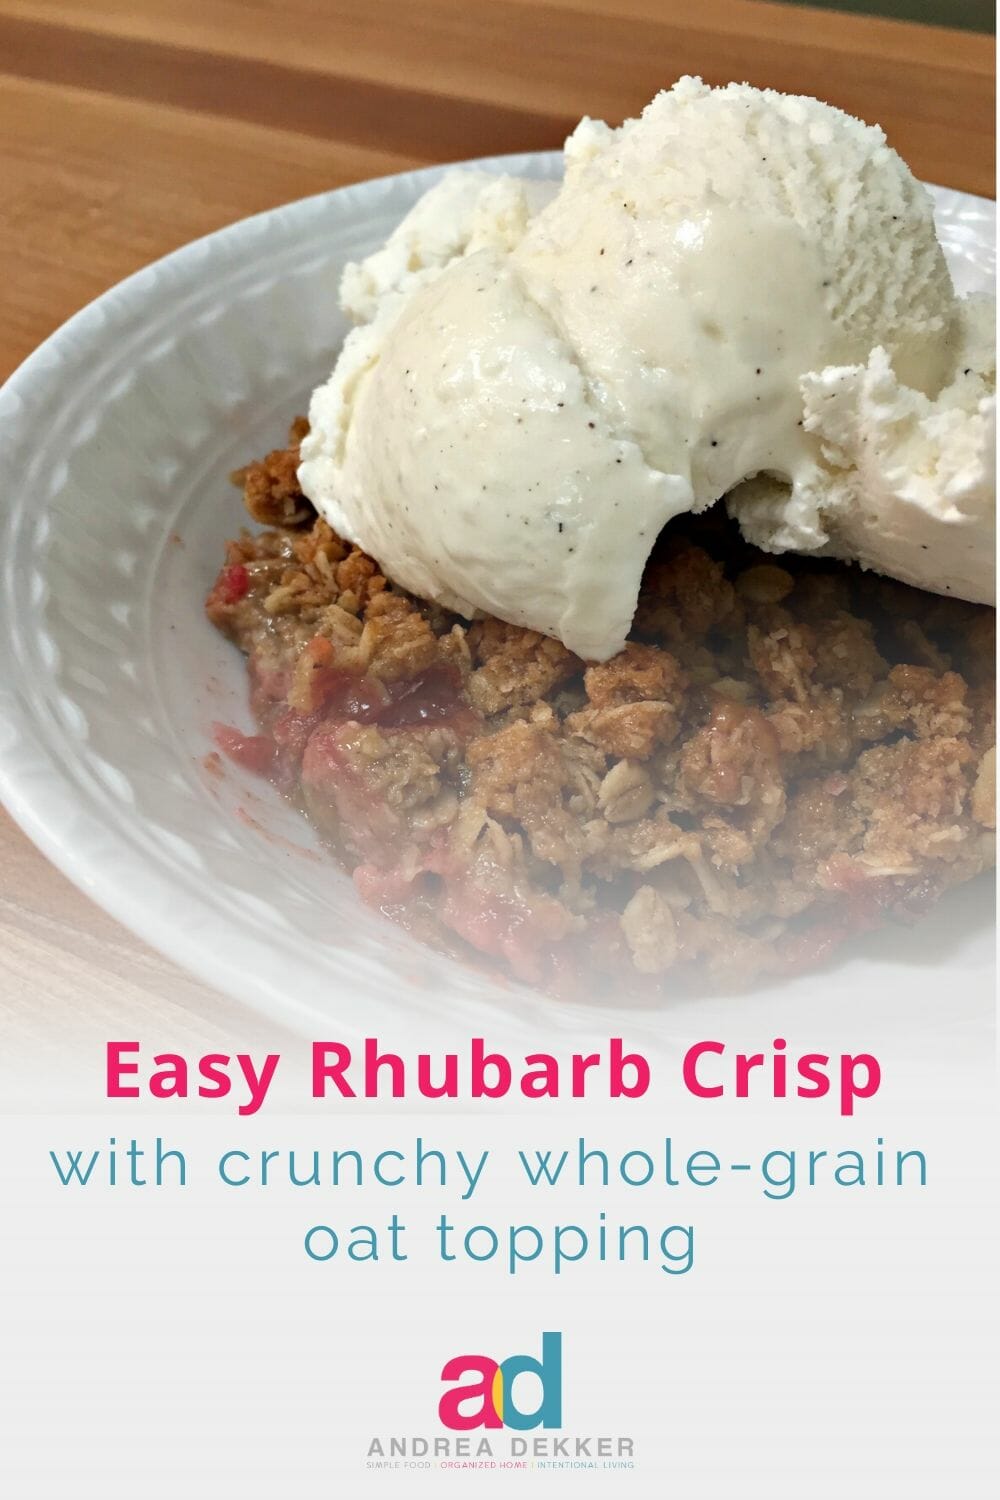 This deliciously tart and sweet rhubarb crisp topped with a crunchy whole-grain oat topping is the ultimate springtime dessert... a scoop of creamy vanilla ice cream doesn't hurt either!  via @andreadekker